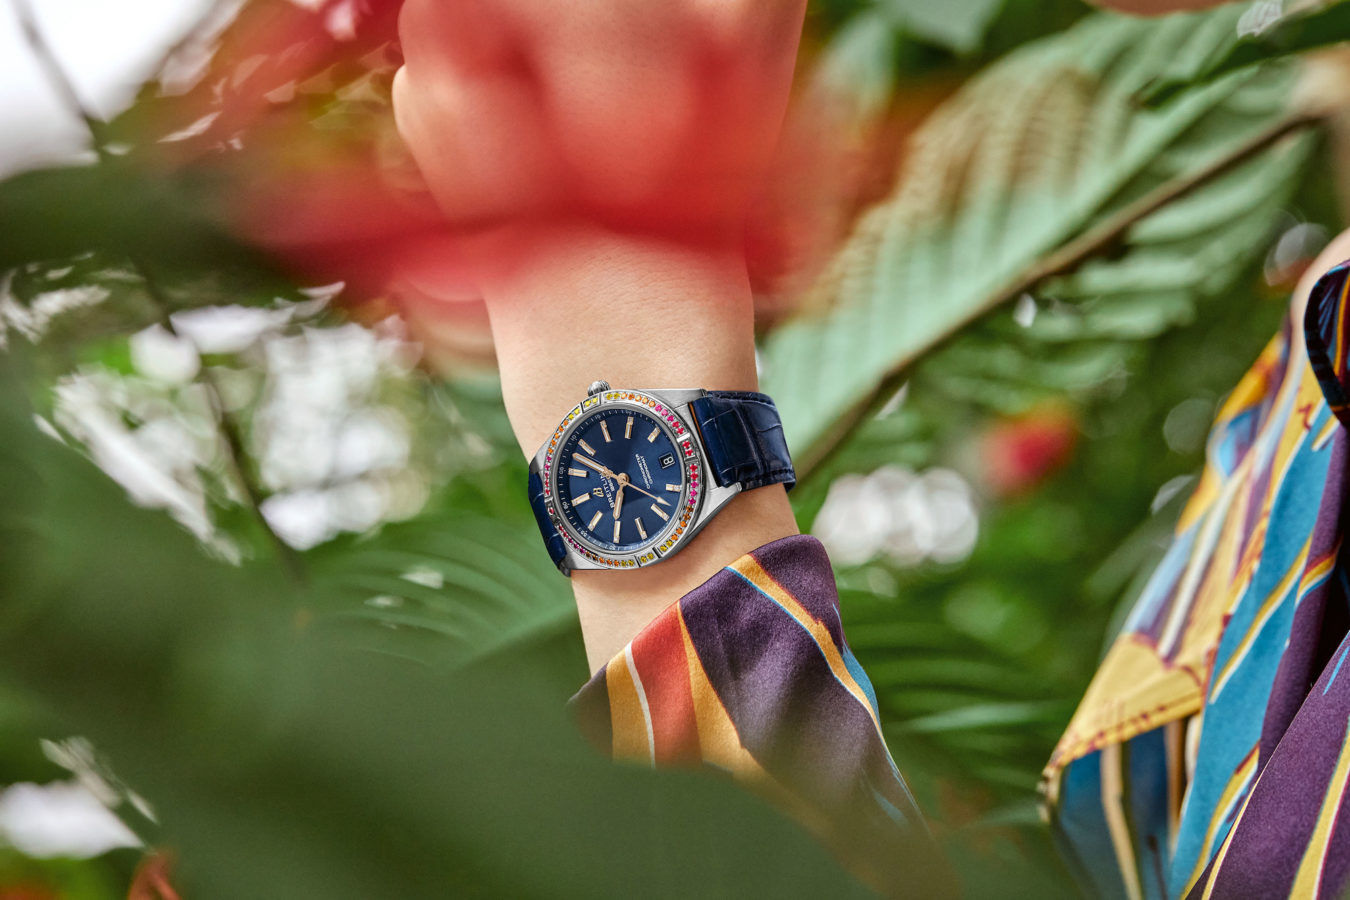 Breitling’s colourful and exclusive new South Sea Capsule Collection is a free-spirited ode to summer